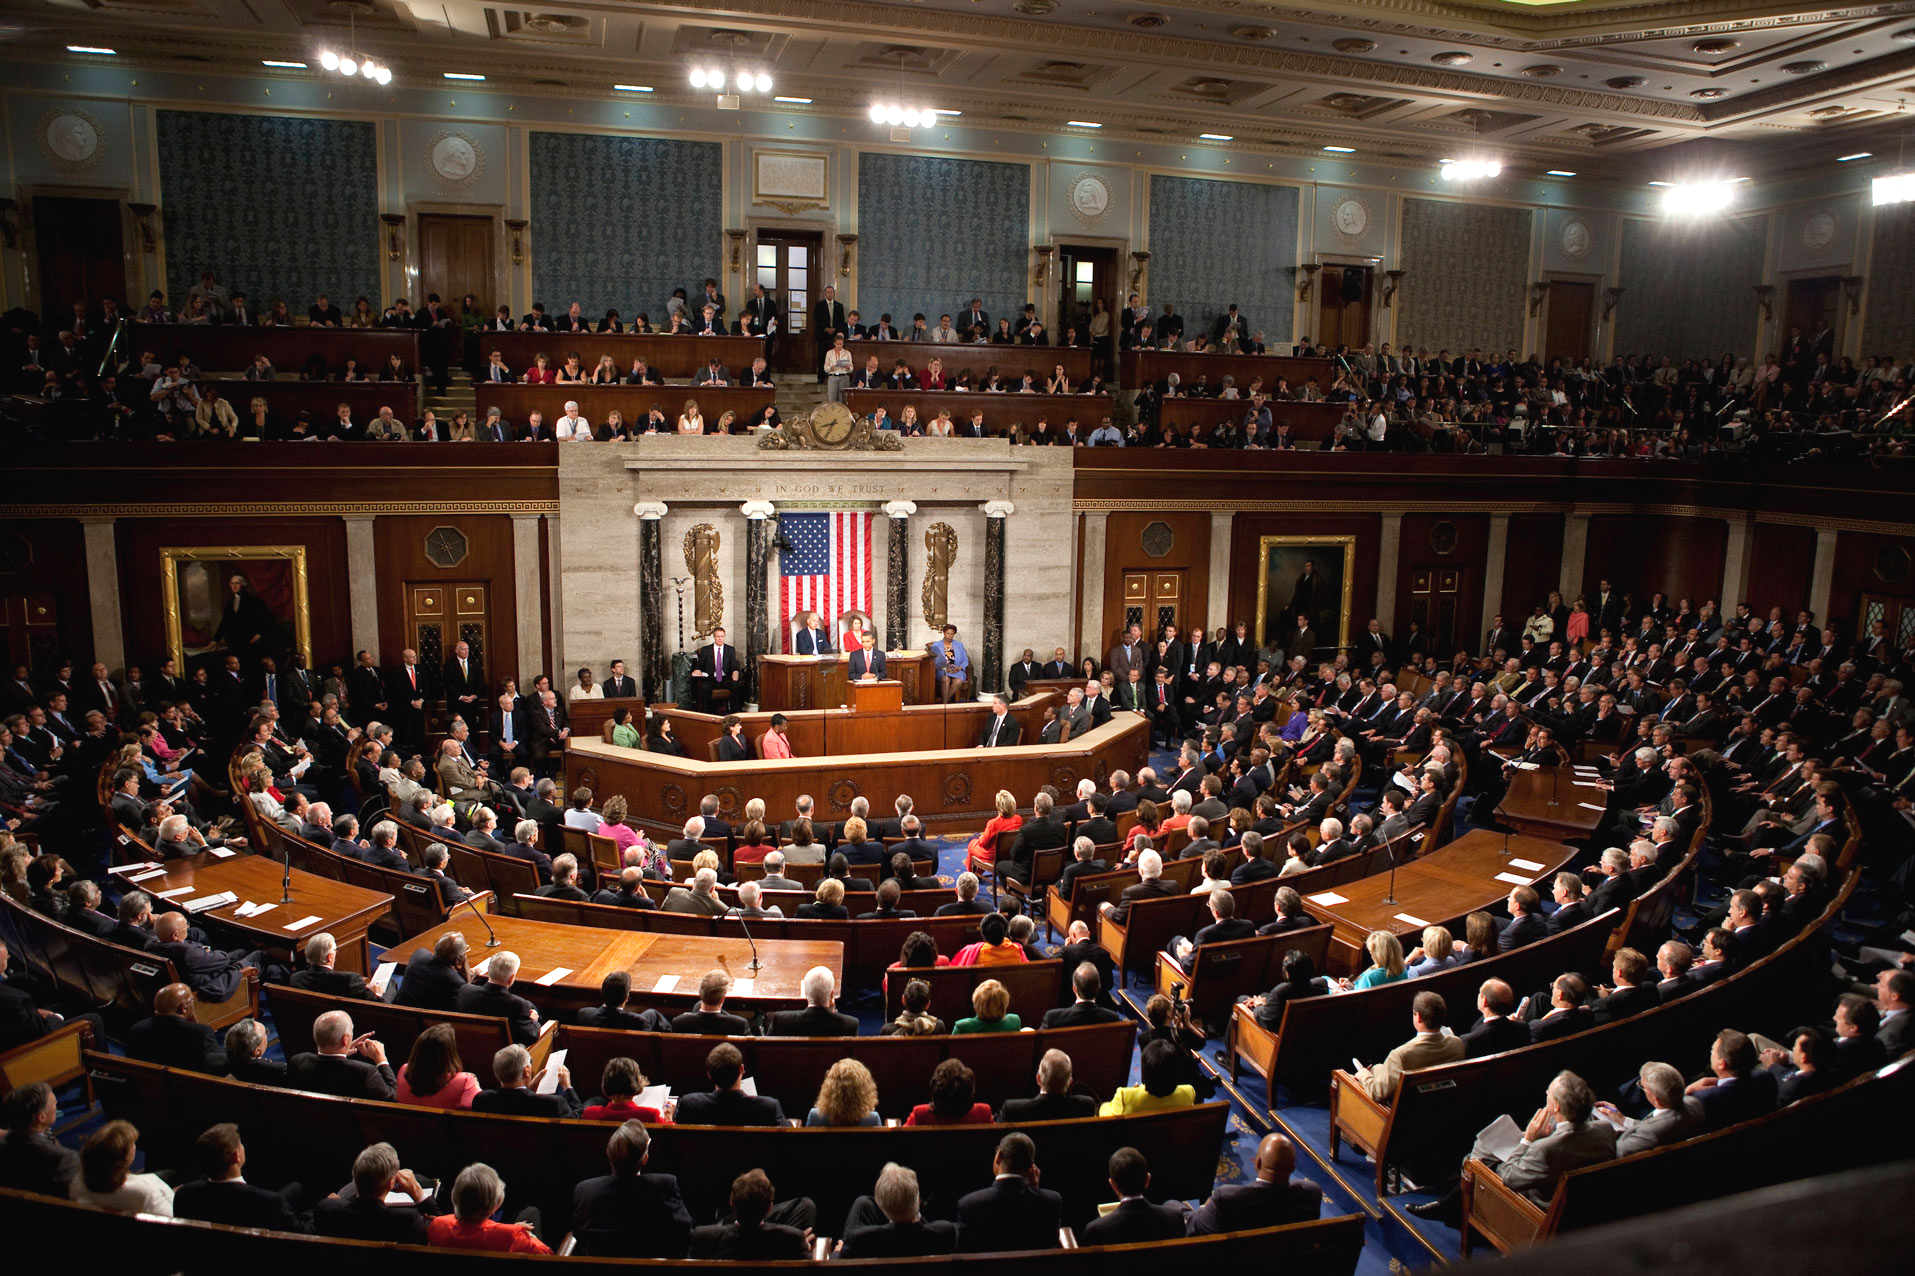 Obama Health Care Speech to Joint Session of Congress | Vía: Wikipedia (link)